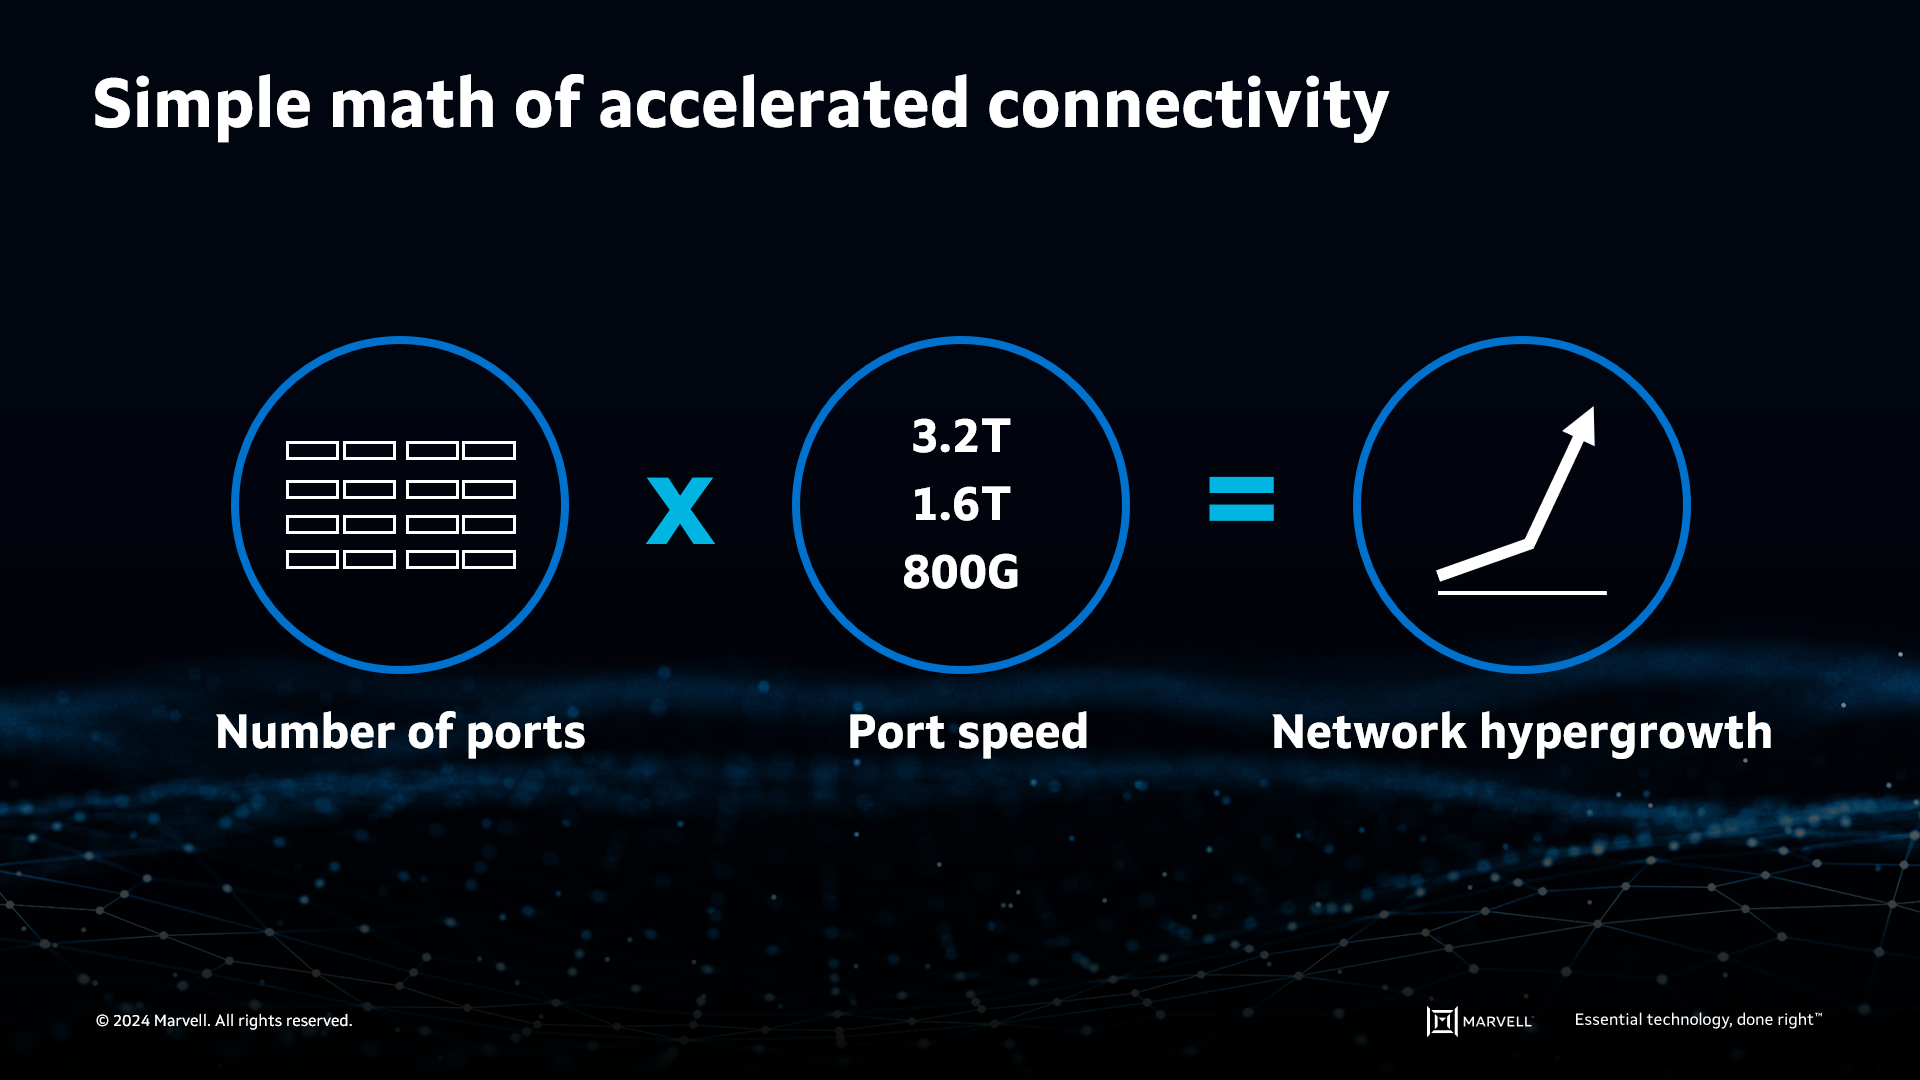 Accelerated connectivity is poised for exponential growth